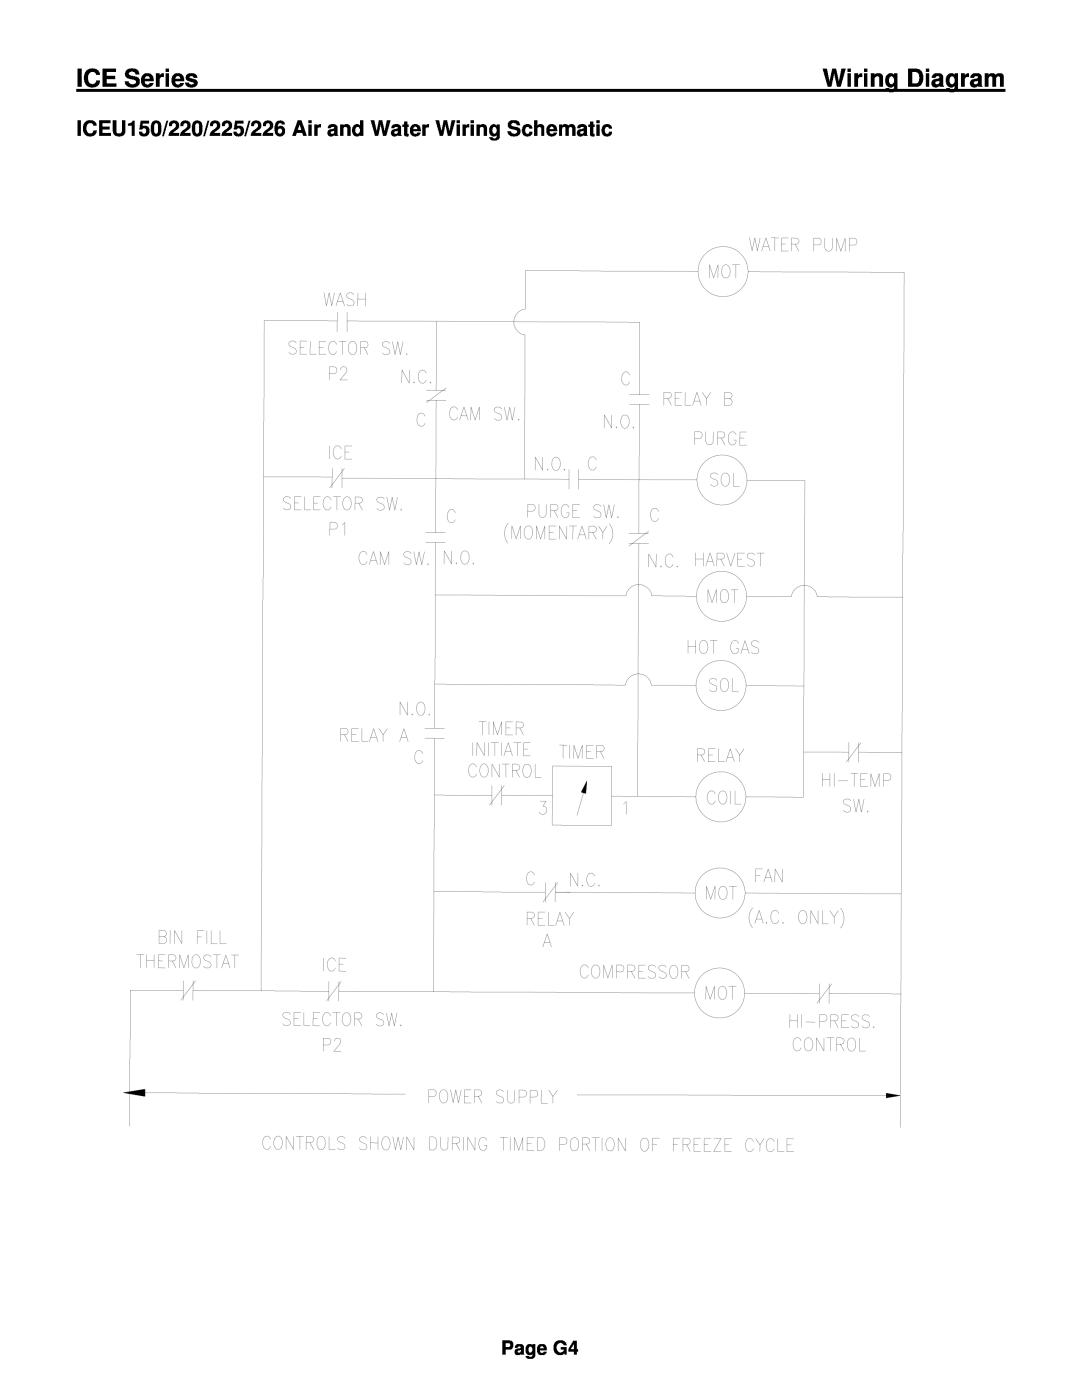 Ice-O-Matic ICE0250 Series ICEU150/220/225/226 Air and Water Wiring Schematic, ICE Series, Wiring Diagram, Page G4 